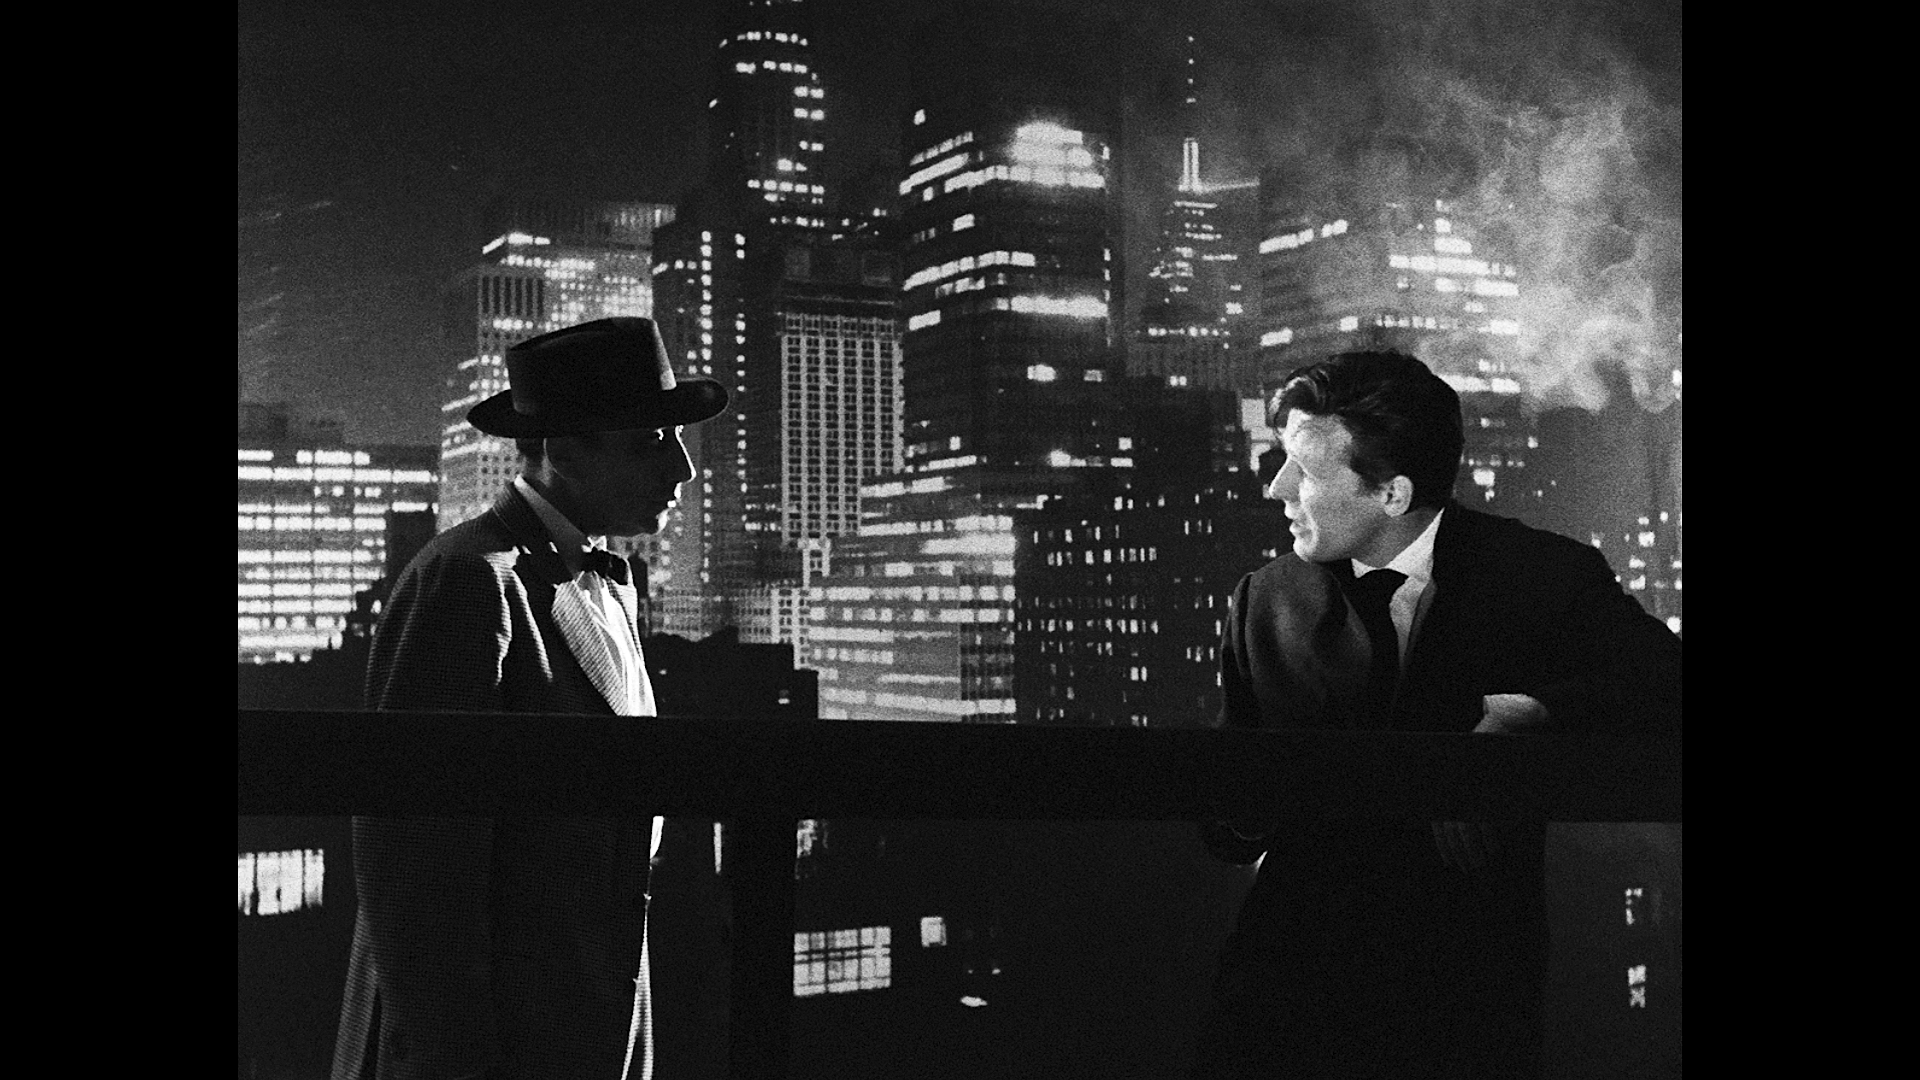 Two men at night with the New York skyline behind them